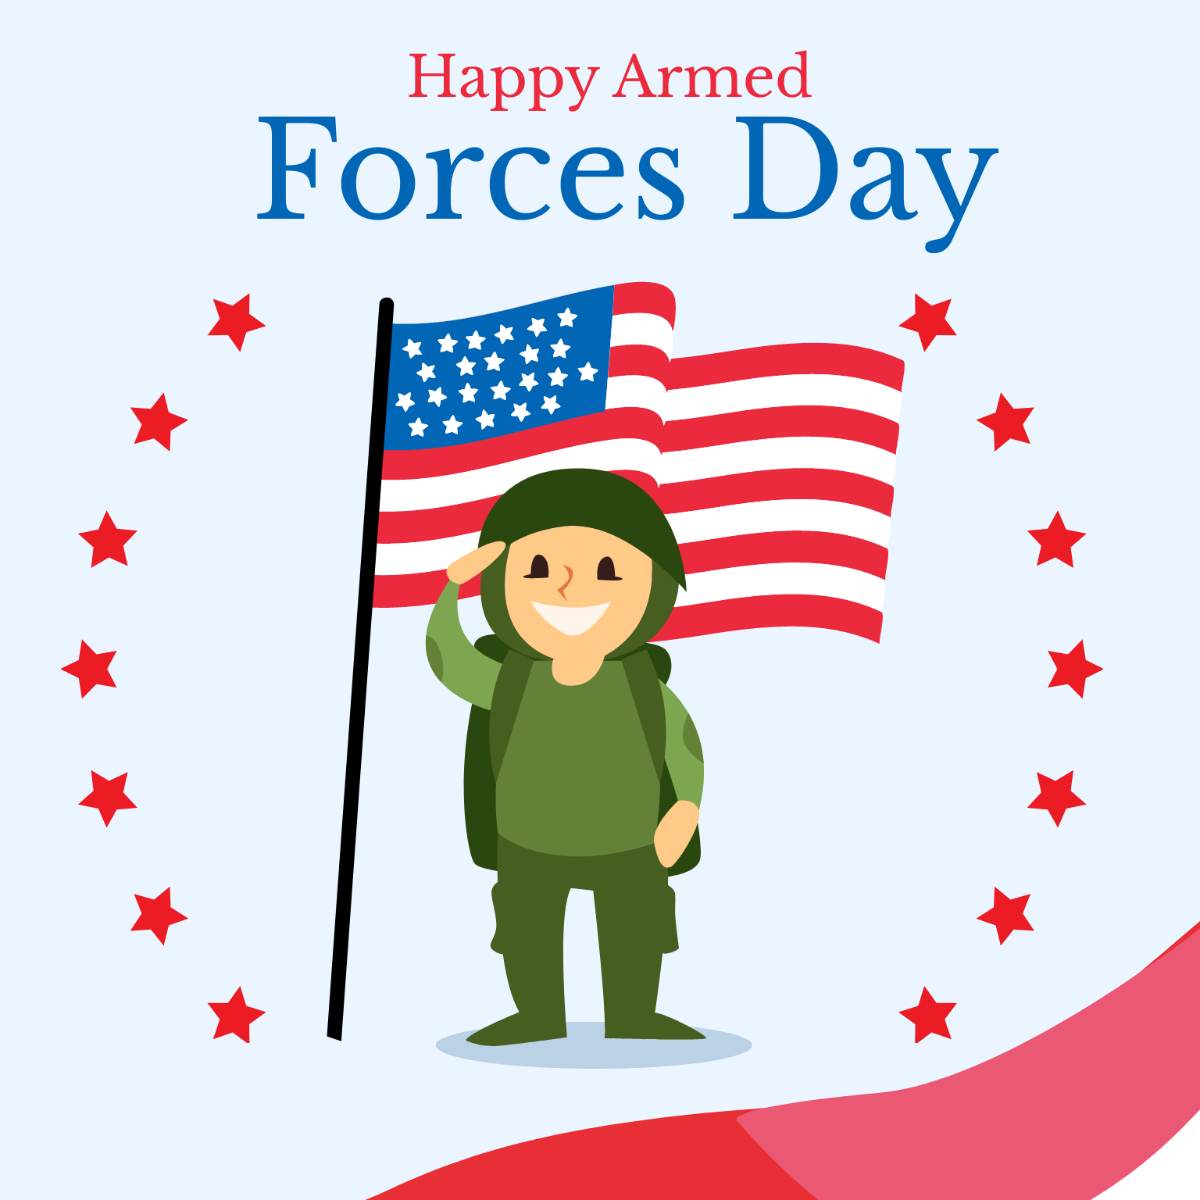 Happy Armed Forces Day Illustration